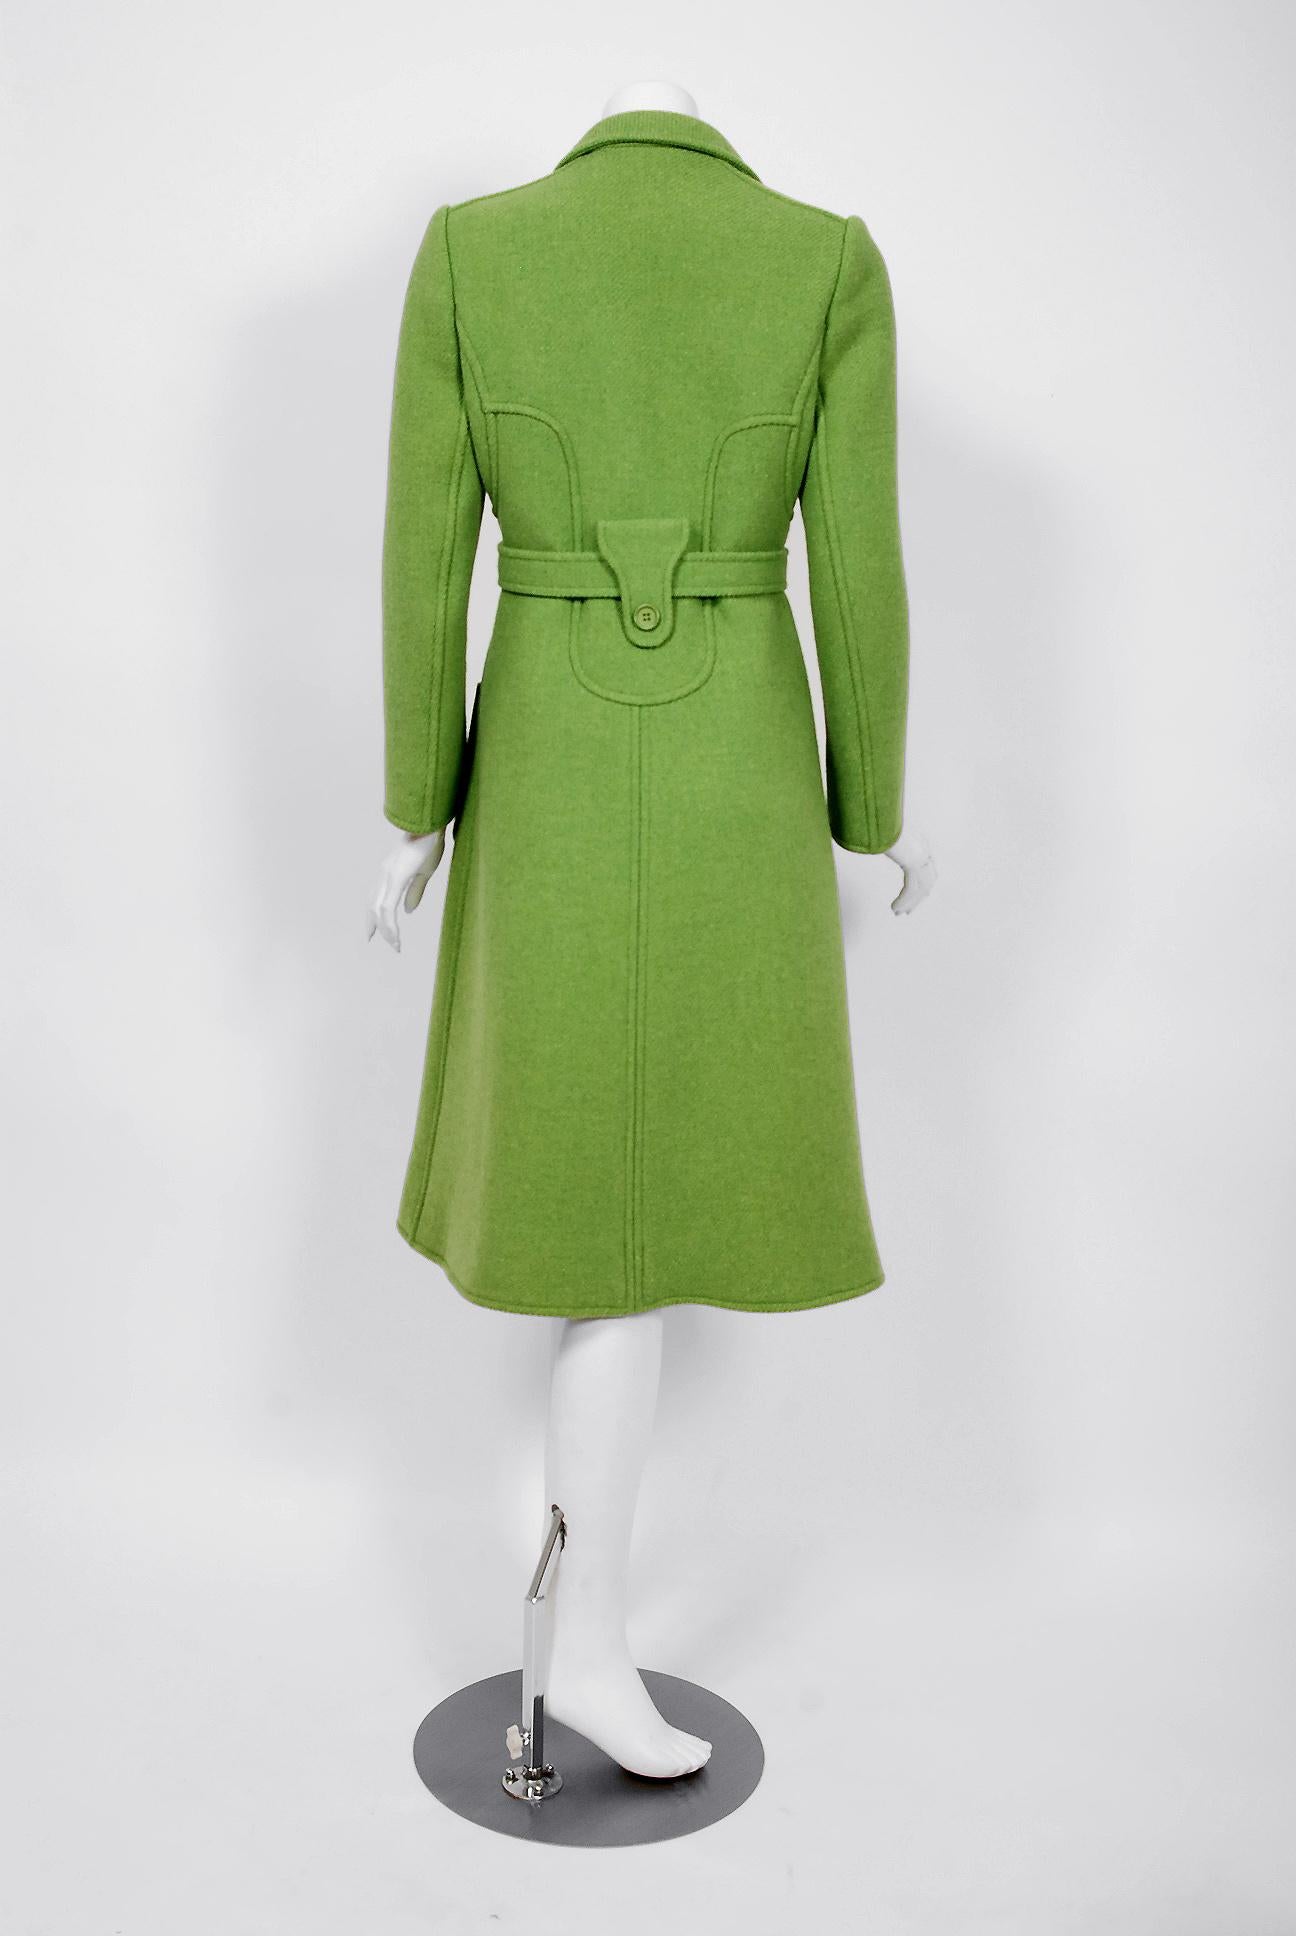 Women's Vintage 1969 Courreges Couture Green Wool Double-Breasted Mod Belted Coat 